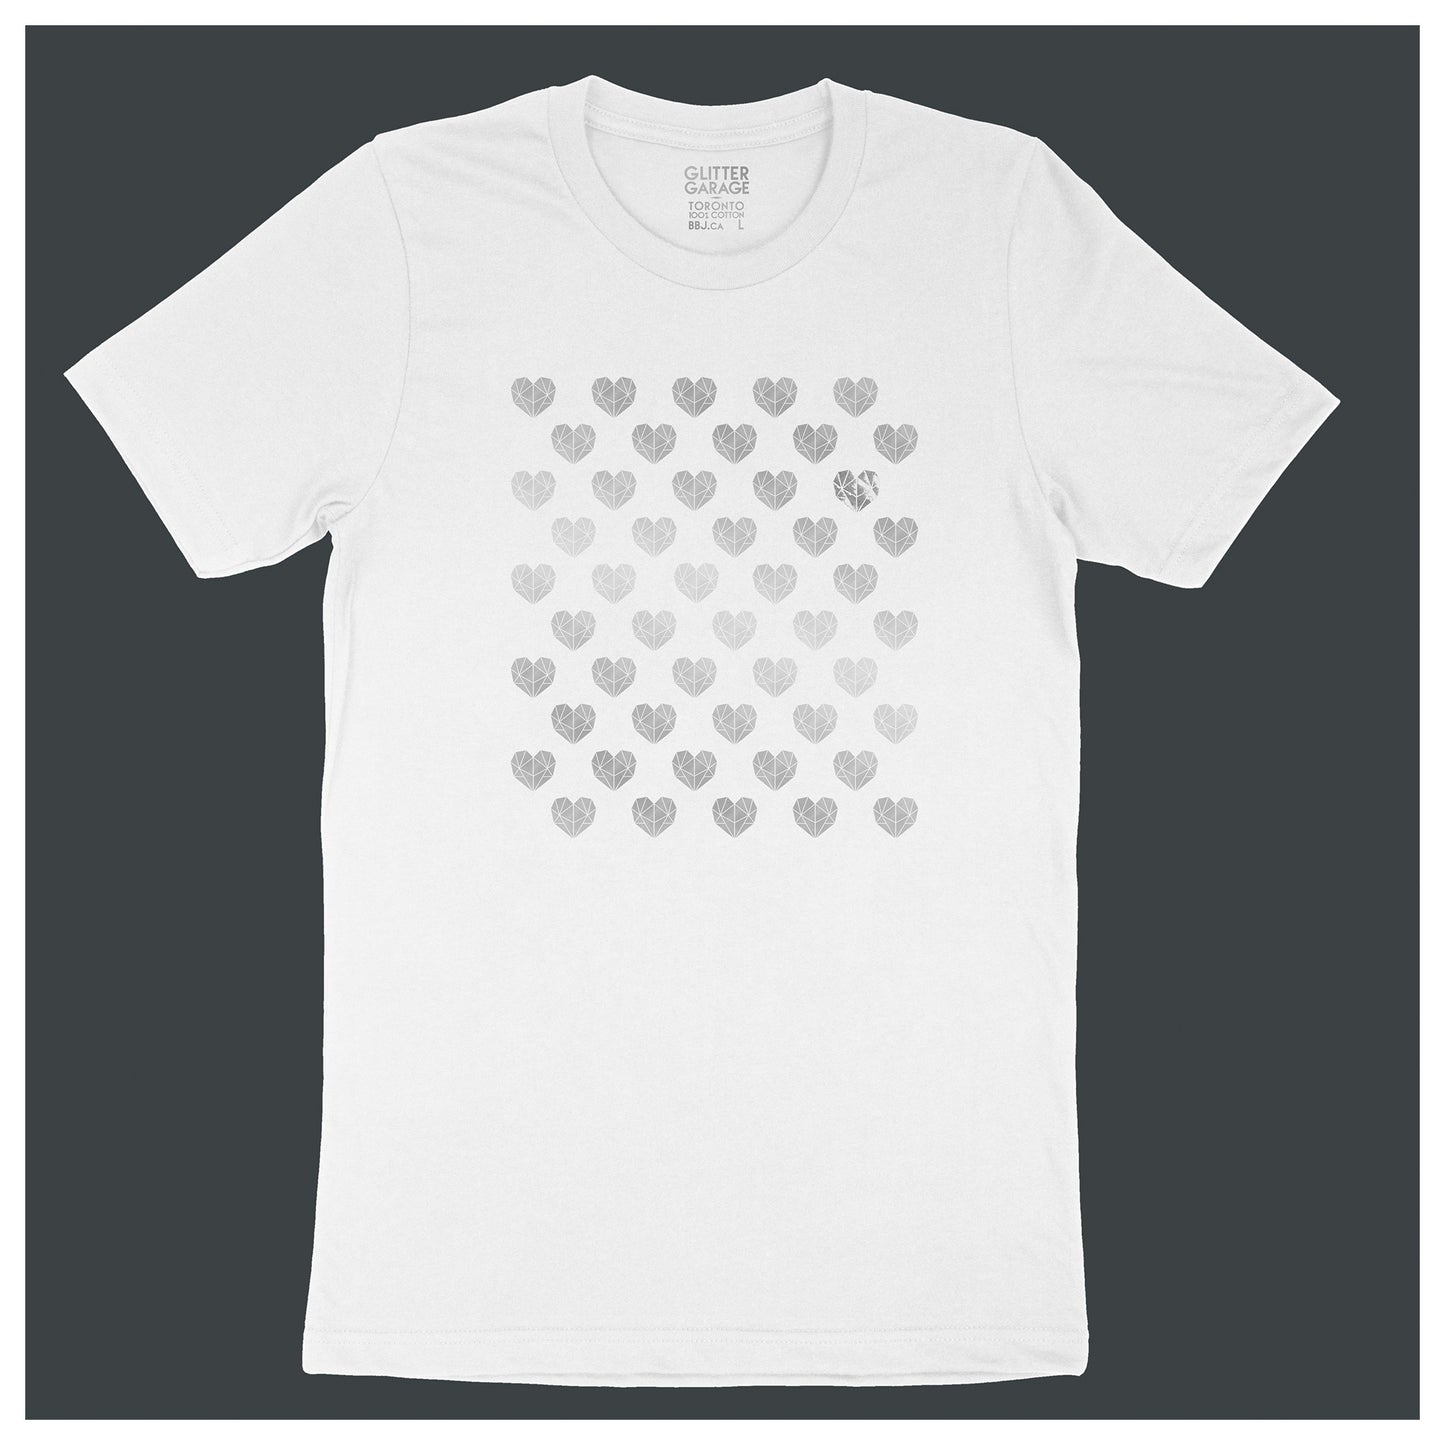 Many Hearts customizable tee - white unisex tee with 50 hearts  - silver matte, metallic by BBJ / Glitter Garage